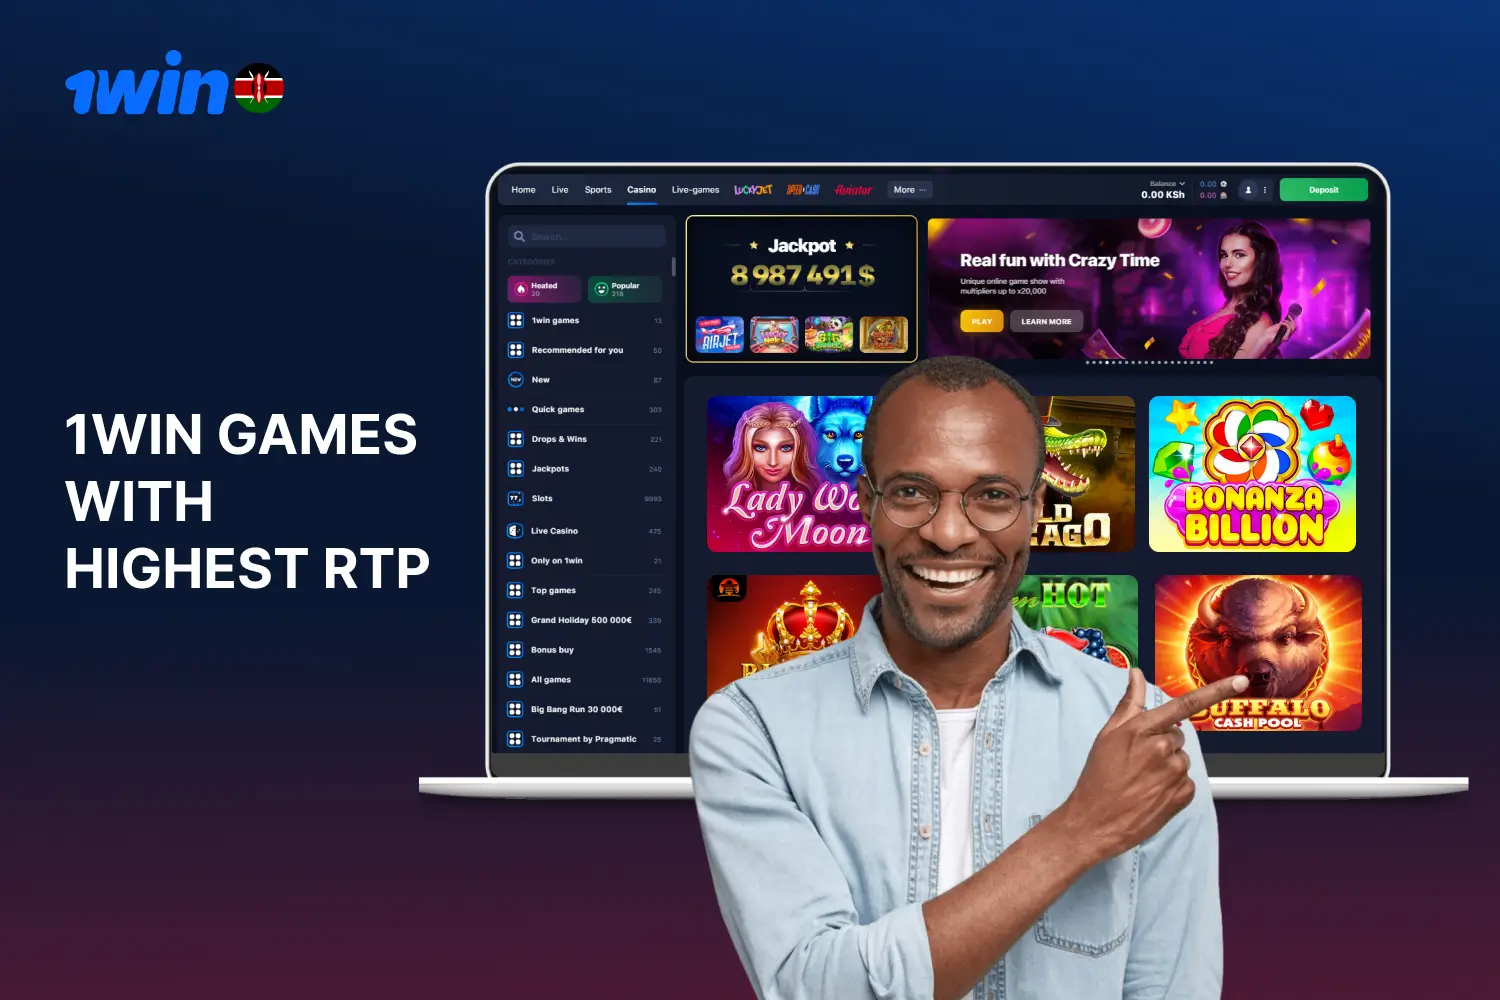 1win casino offers gamblers in Kenya many games with high RTPs